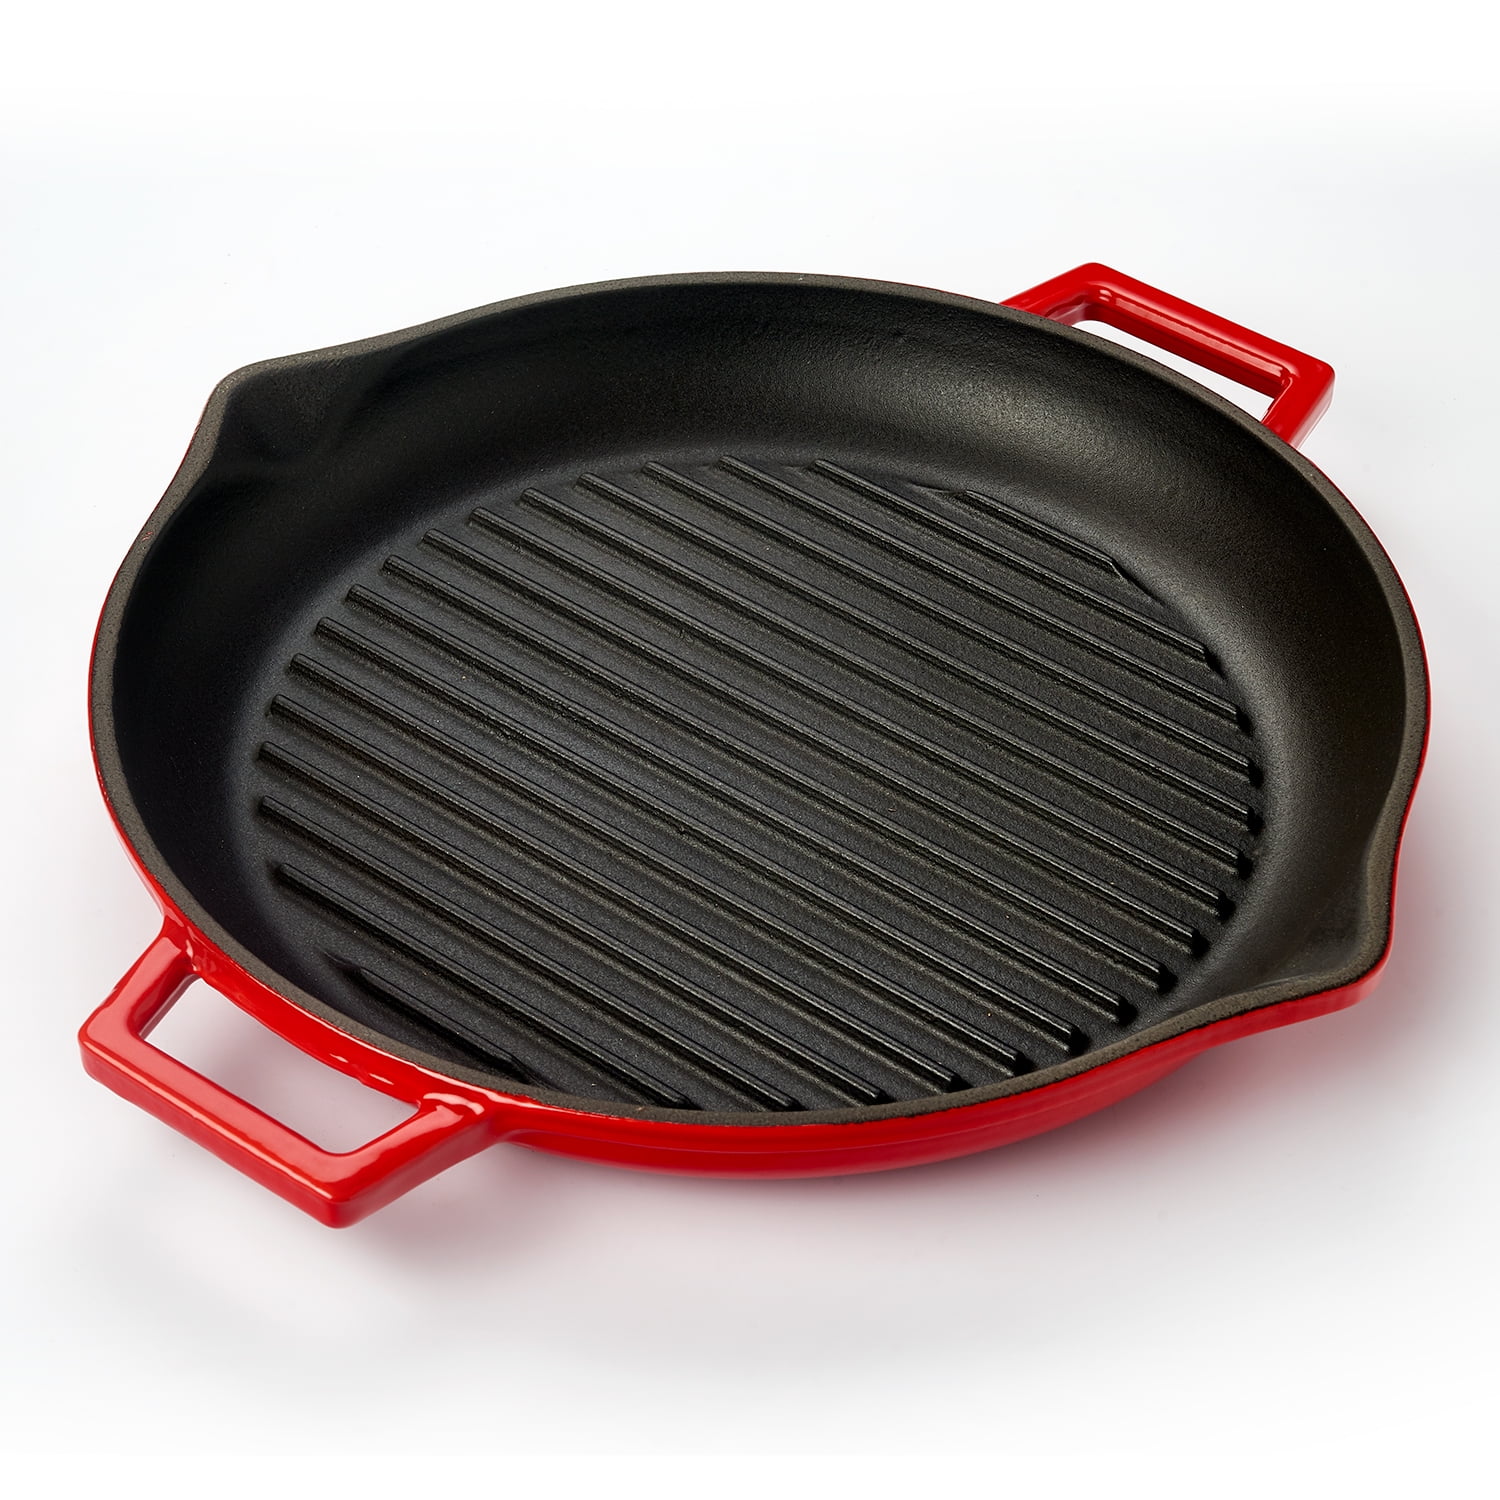 Schnesland Grill Pan for Stove Tops Nonstick Marble Coating Aluminum  Induction Steak Pan with Pour Spout